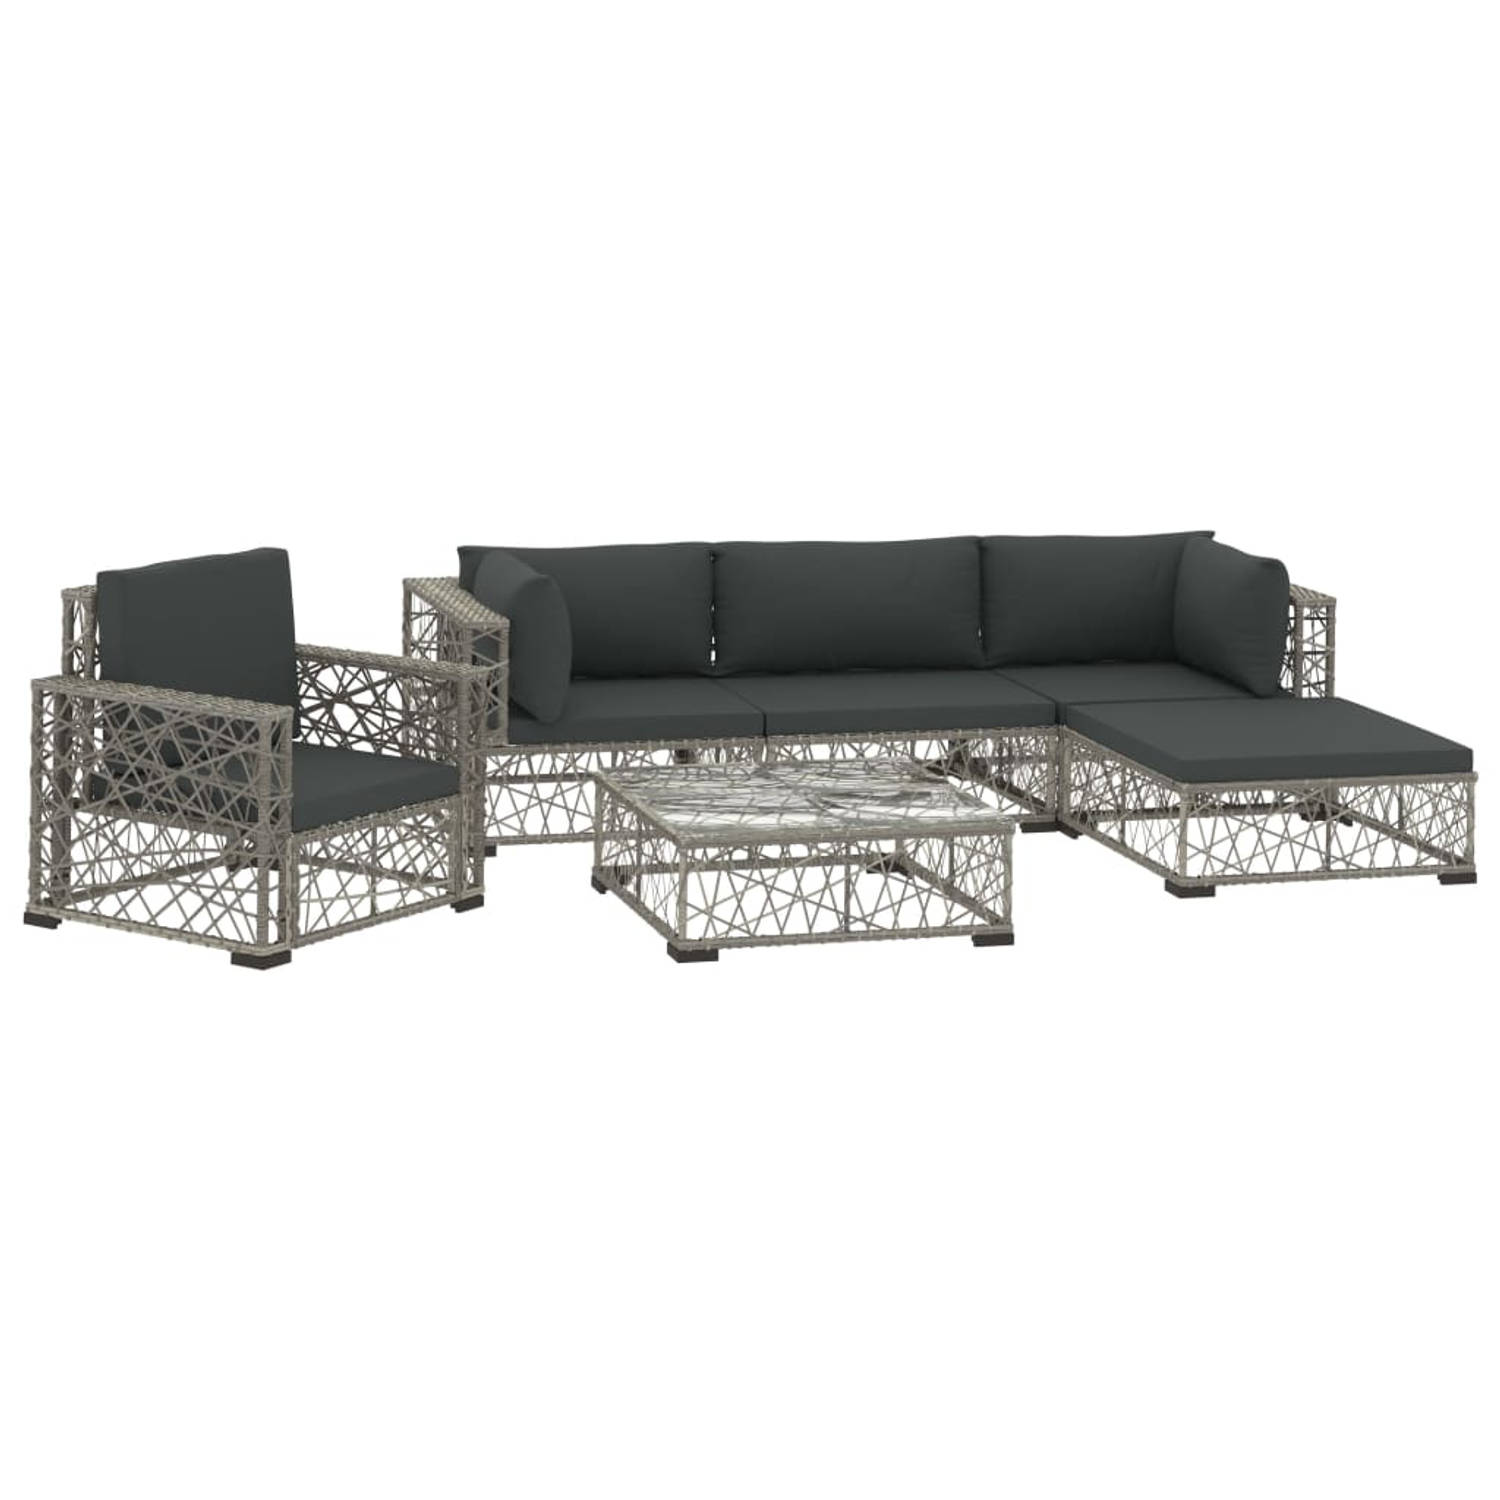 The Living Store loungeset Chesterfield - Rattan - Grijs - 7-delig - Inclusief kussens